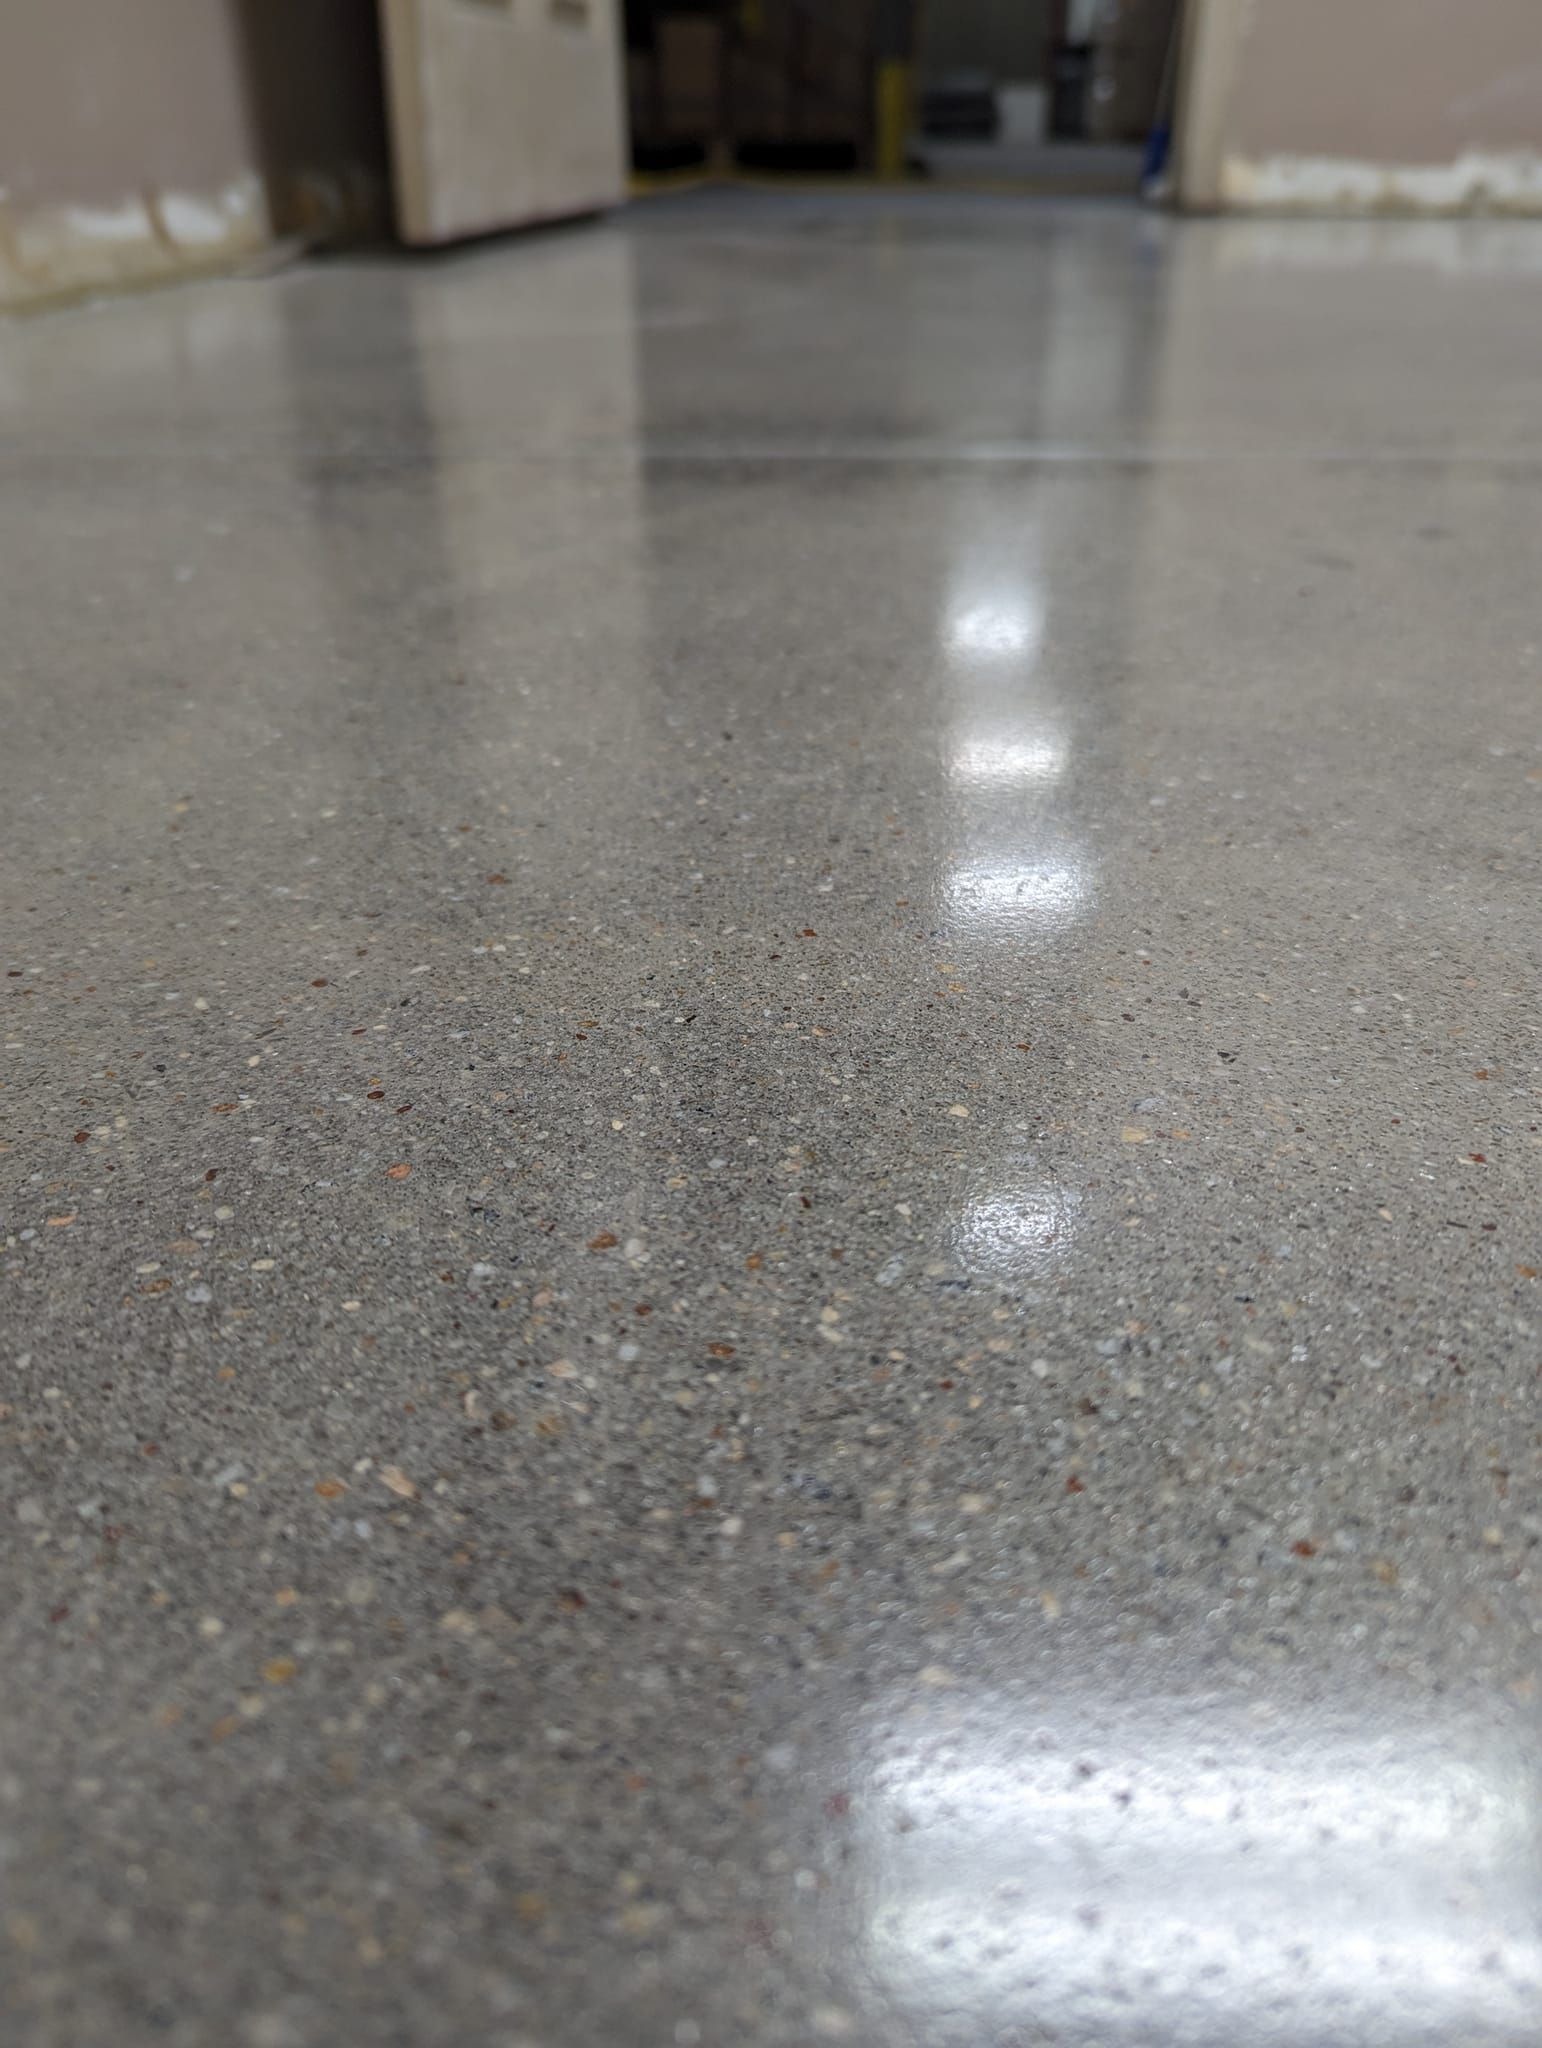 A close up of a shiny concrete floor in a room.